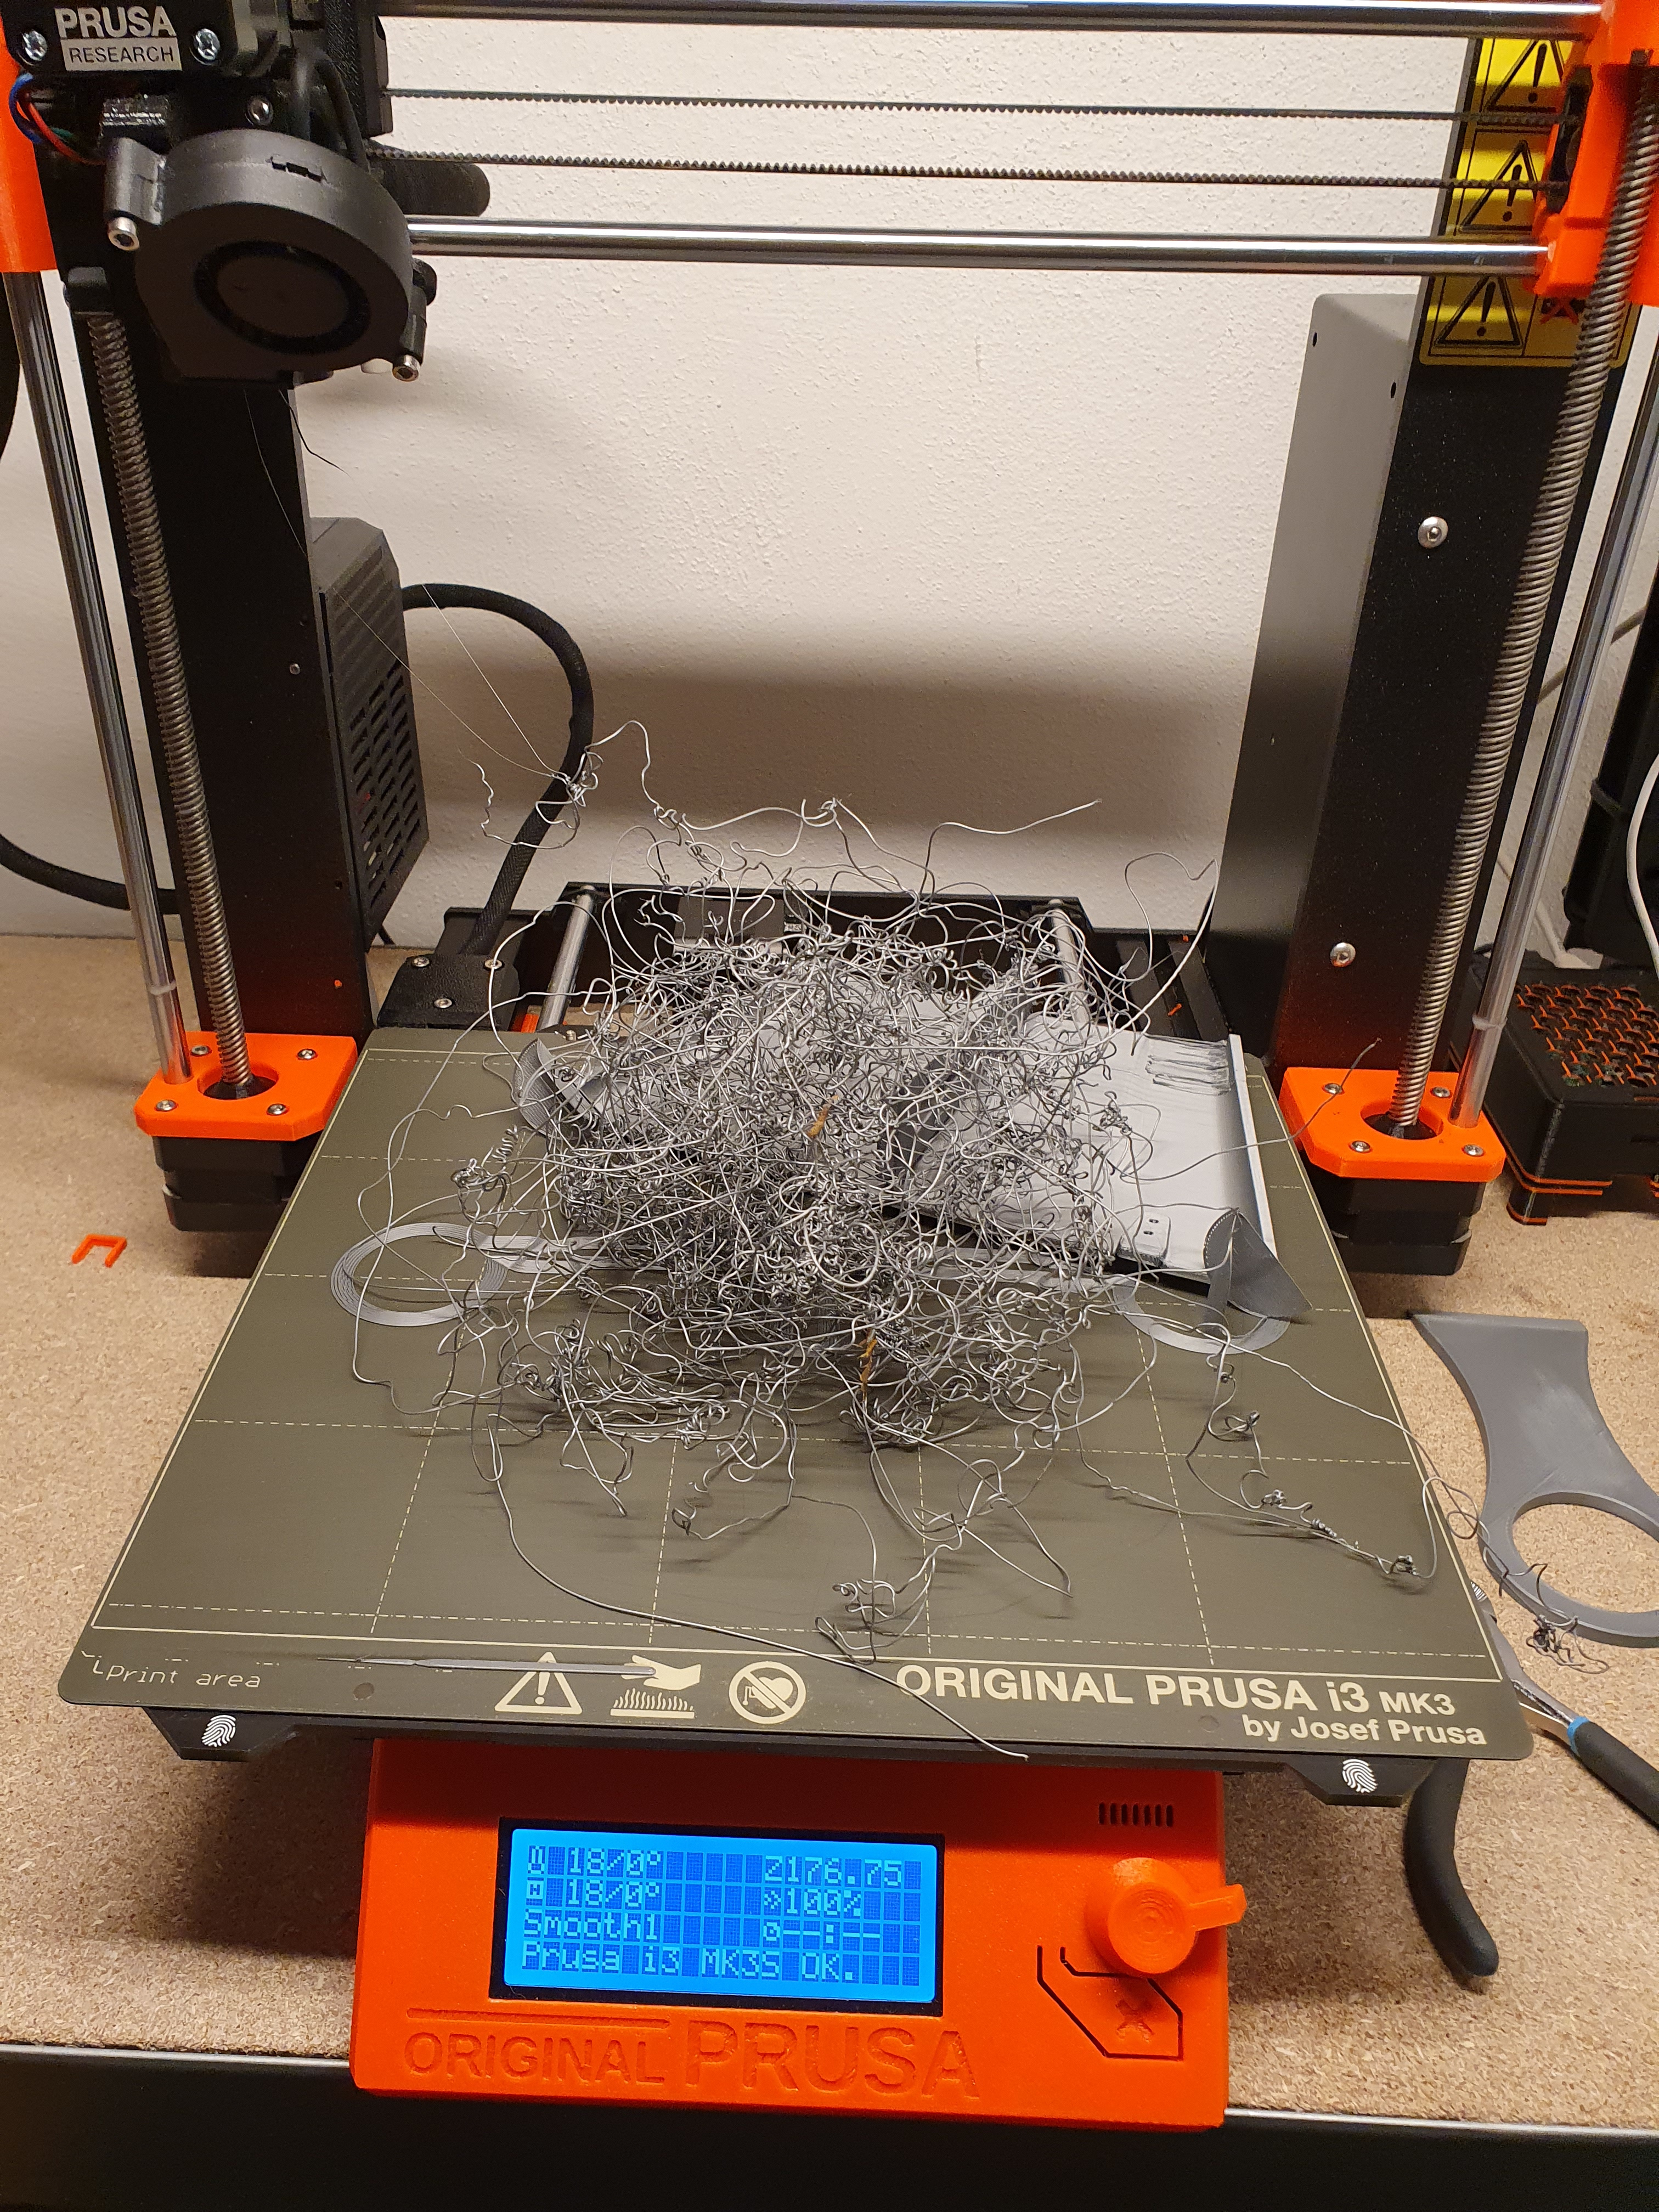 paraply . Fysik tall object with small footprint – How do I print this? (Printing help) –  Prusa3D Forum